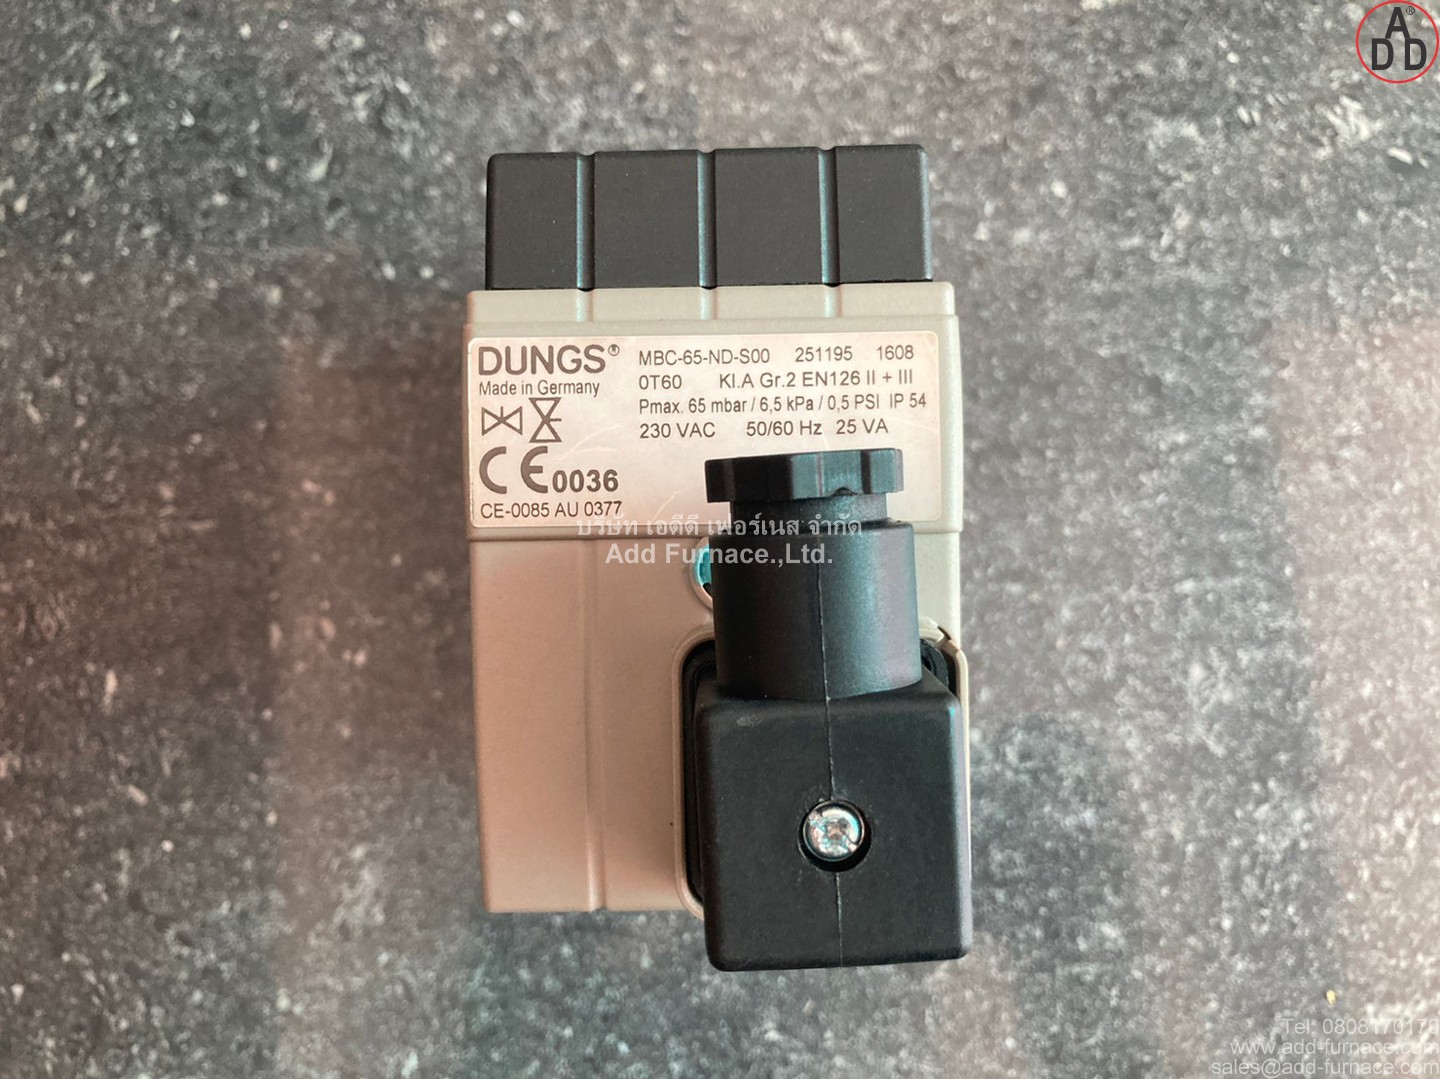 Dungs MBC-65-ND-S00 (1)